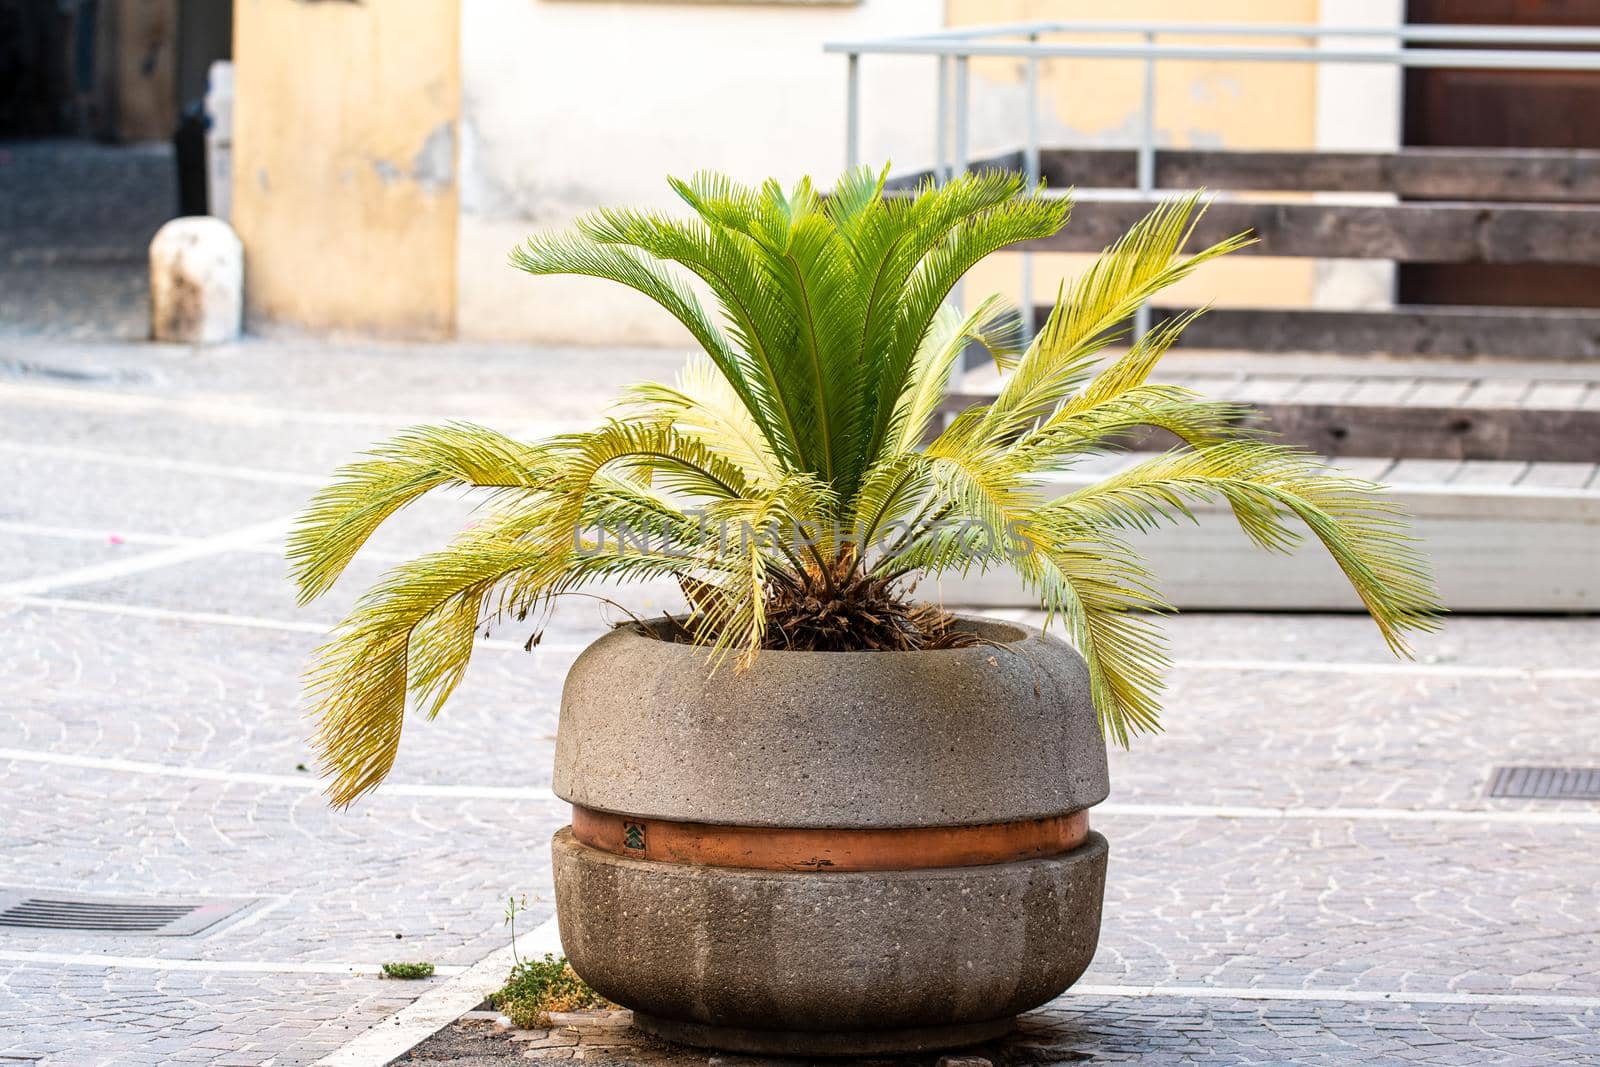 plant on a planter in the city center used as a traffic divider